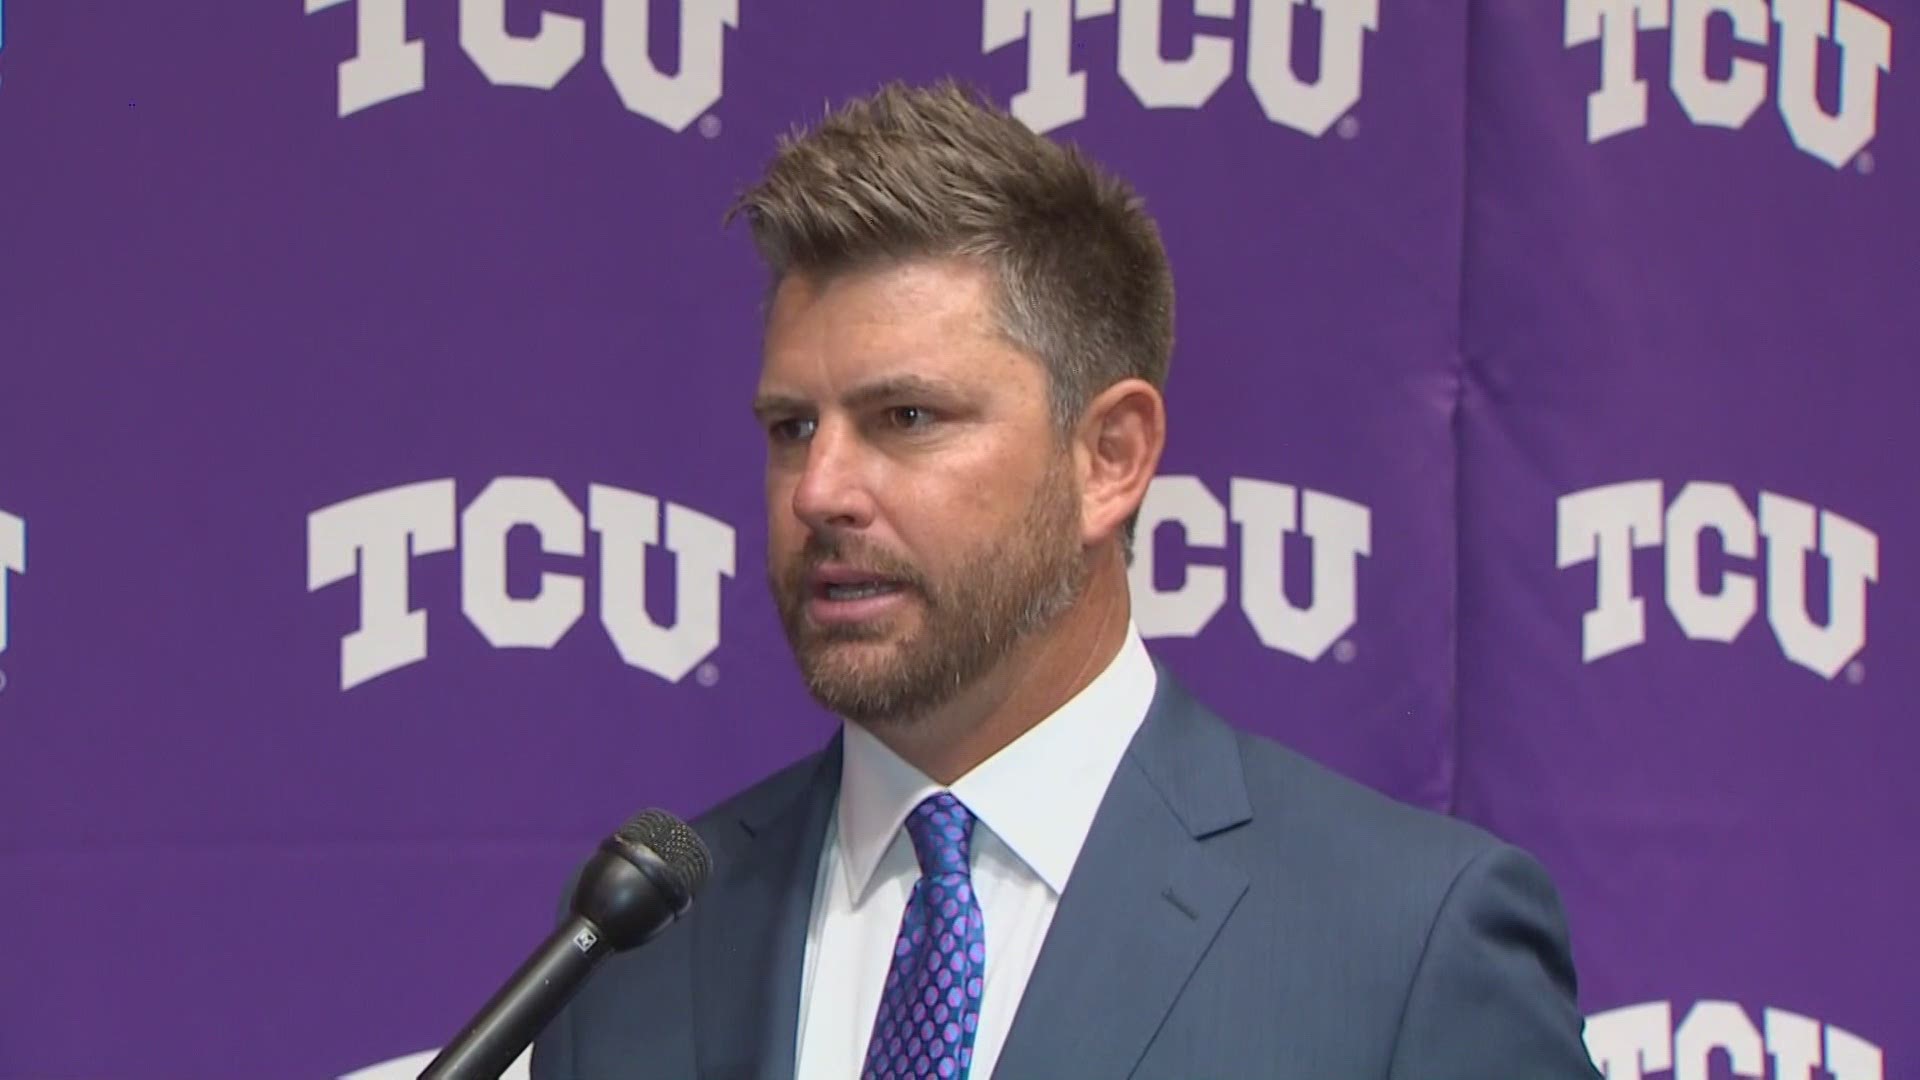 The longtime assistant coach replaces Jim Schlossnagle, who left his 18-year perch atop the Horned Frogs baseball program to take the job at Texas A&M last week.